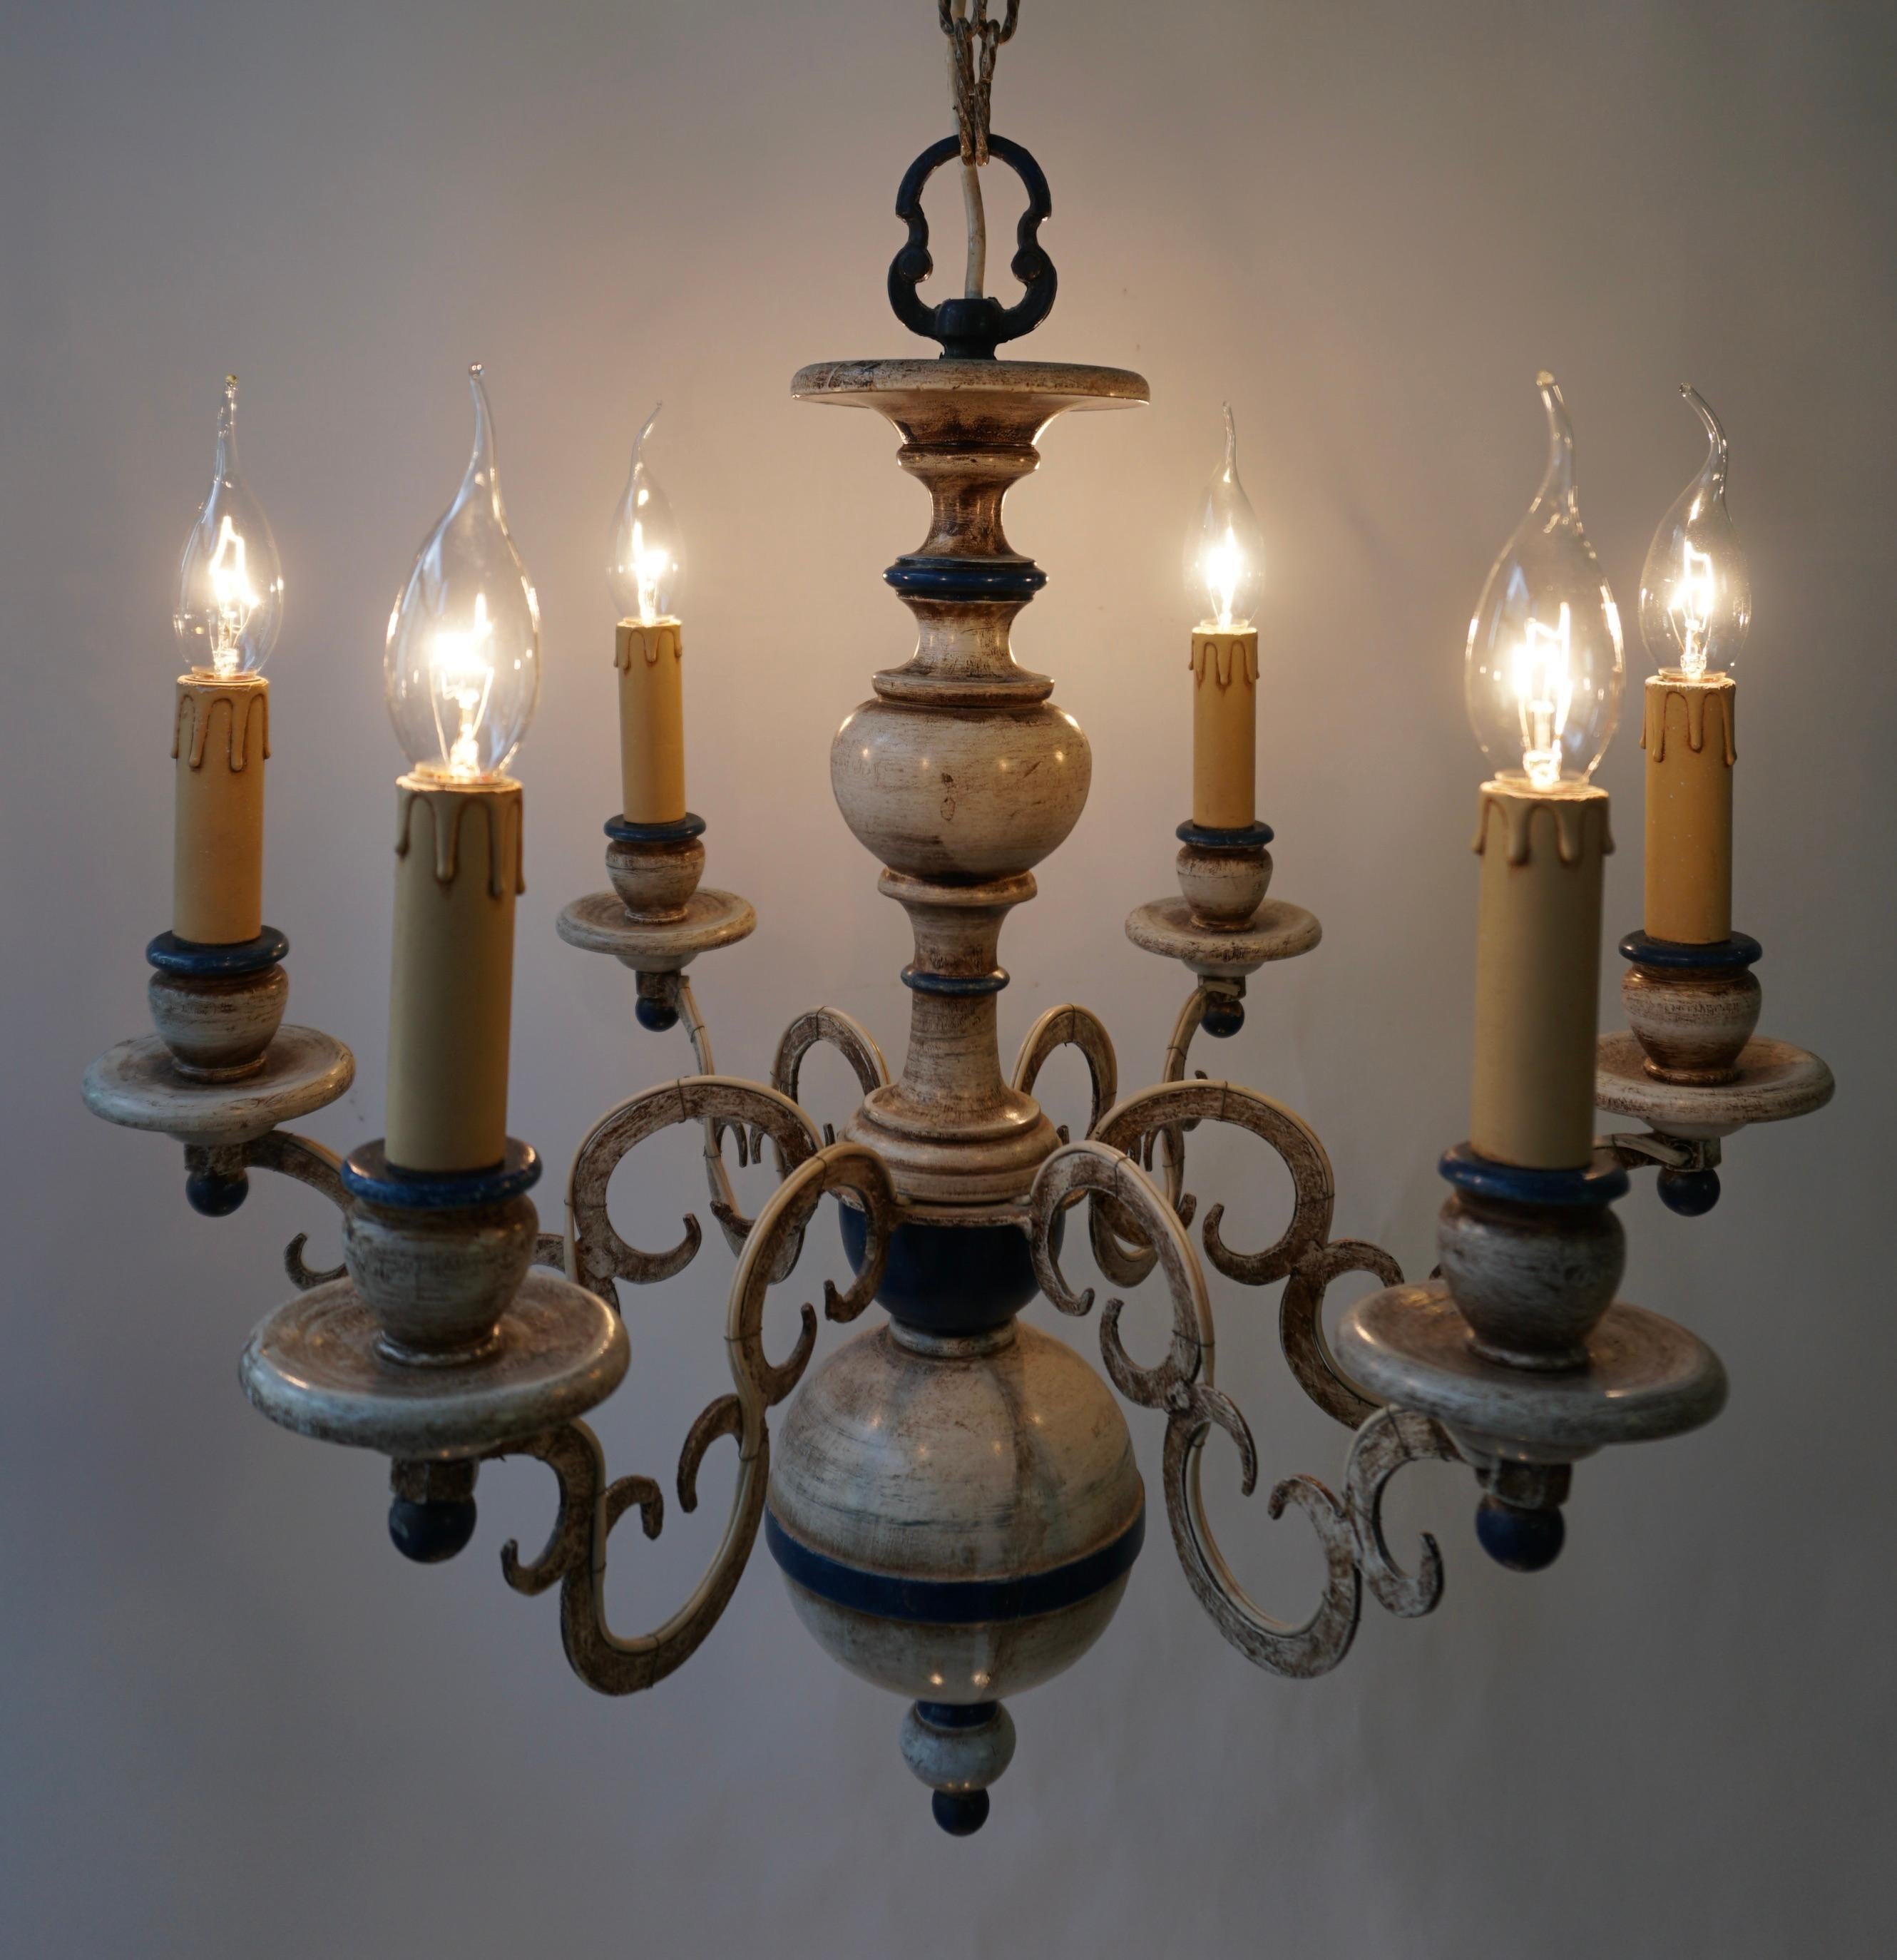 20th Century French Six-Light Painted Wood and Metal Chandelier with Warm White & Blue Tones For Sale